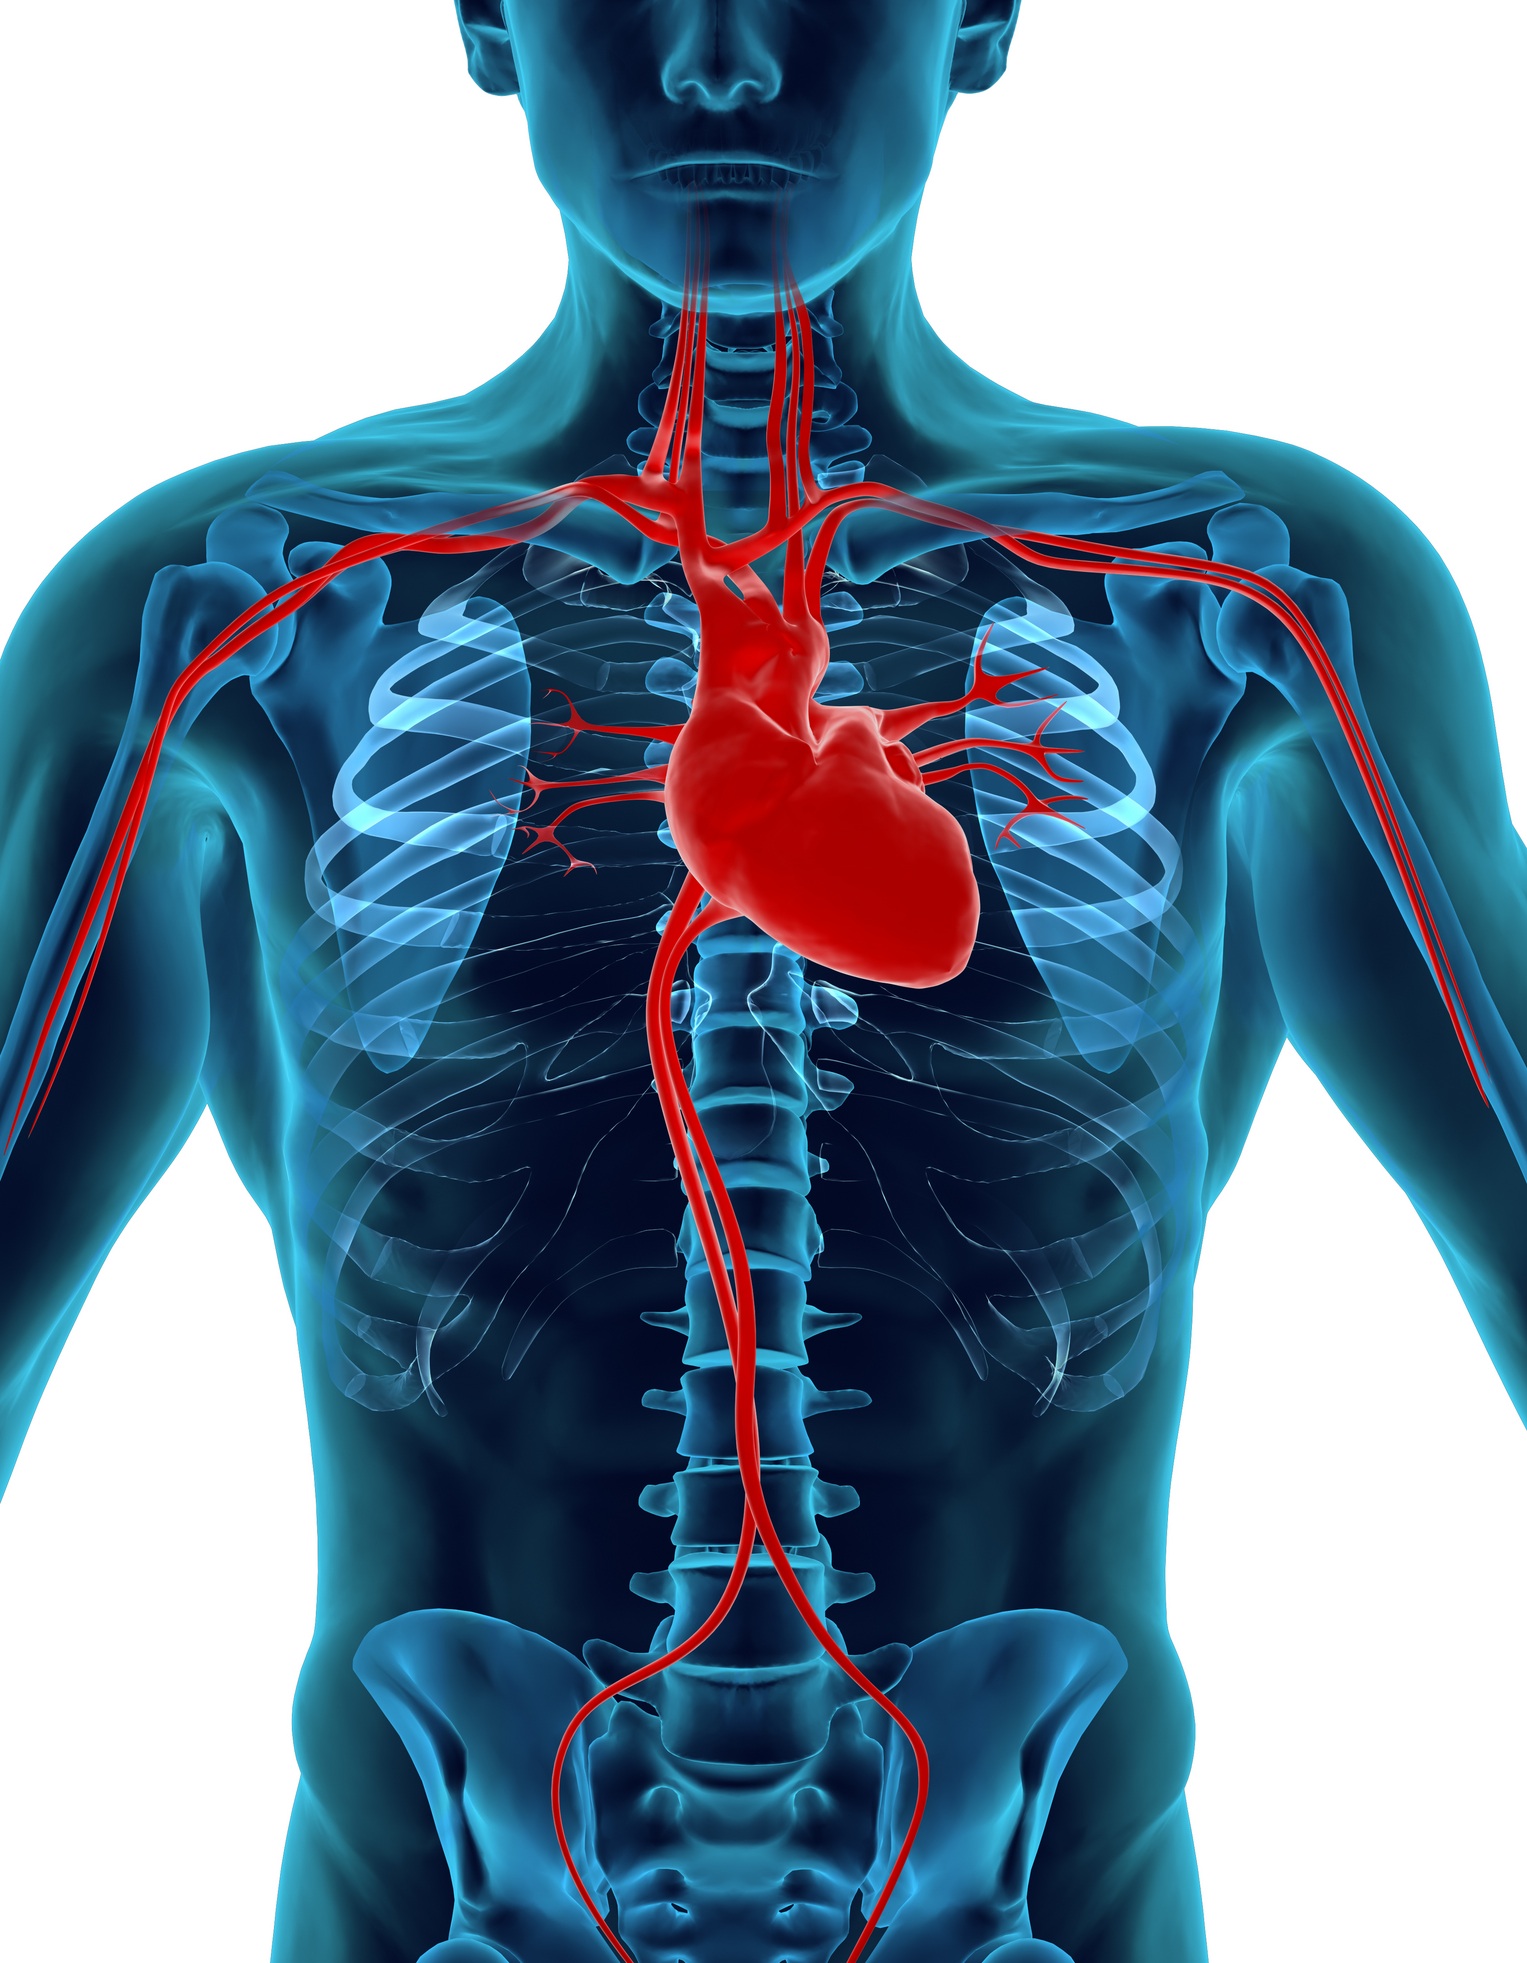 Free Human Heart Images, Download Free Human Heart Images png images